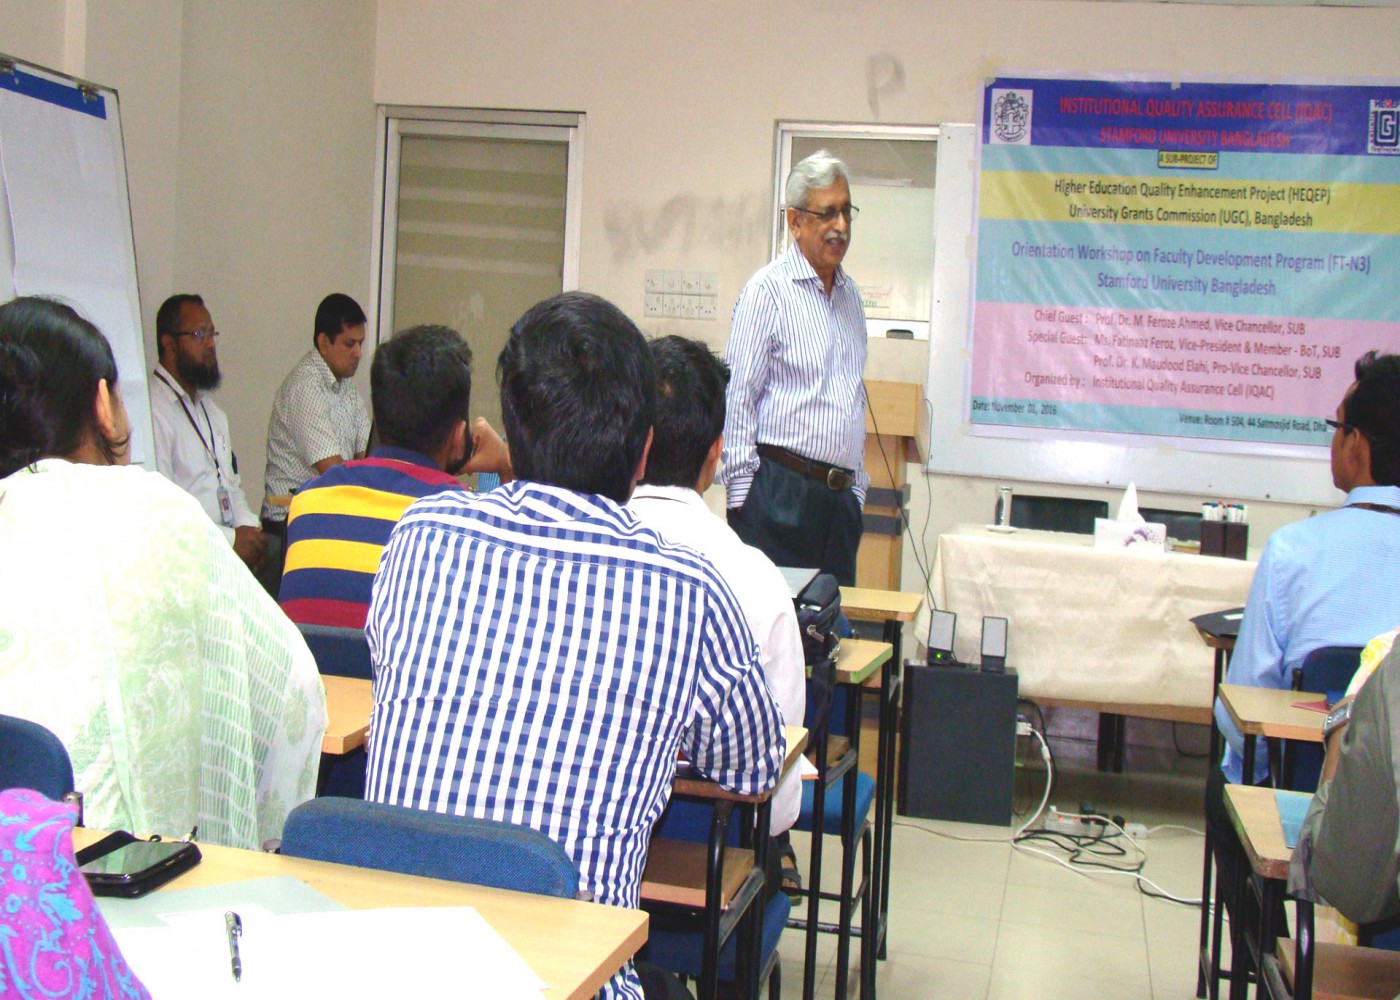 Vice Chancellor of SUB giving his valuable speech of the workshop